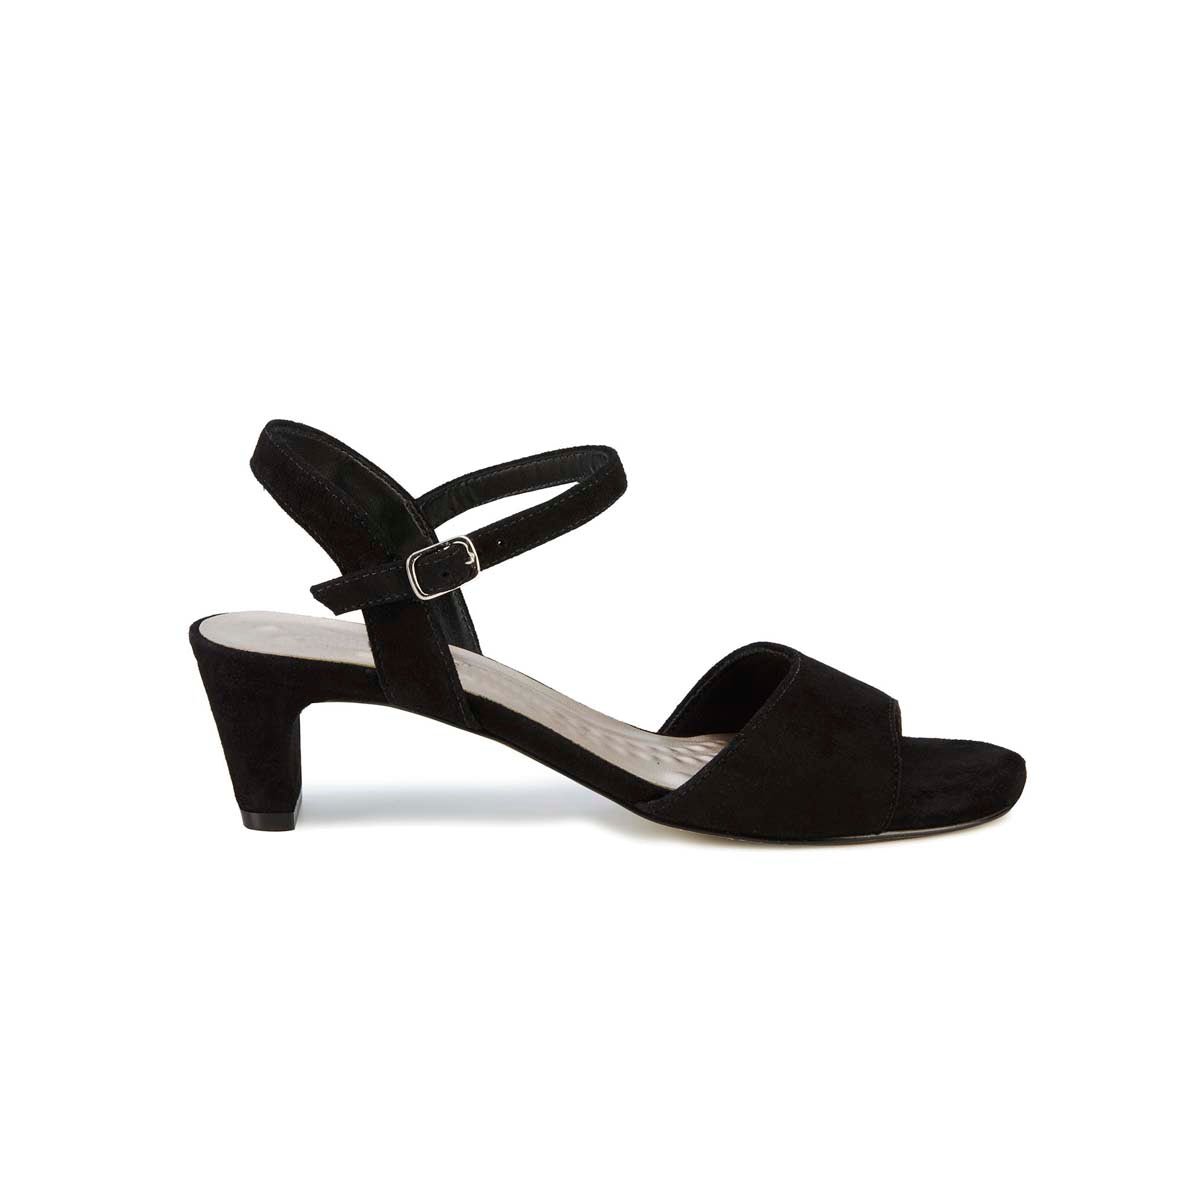 ROS HOMMERSON LYDIA WOMEN ADJUSTABLE BUCKLE STRAP SANDAL IN BLACK SUEDE - TLW Shoes